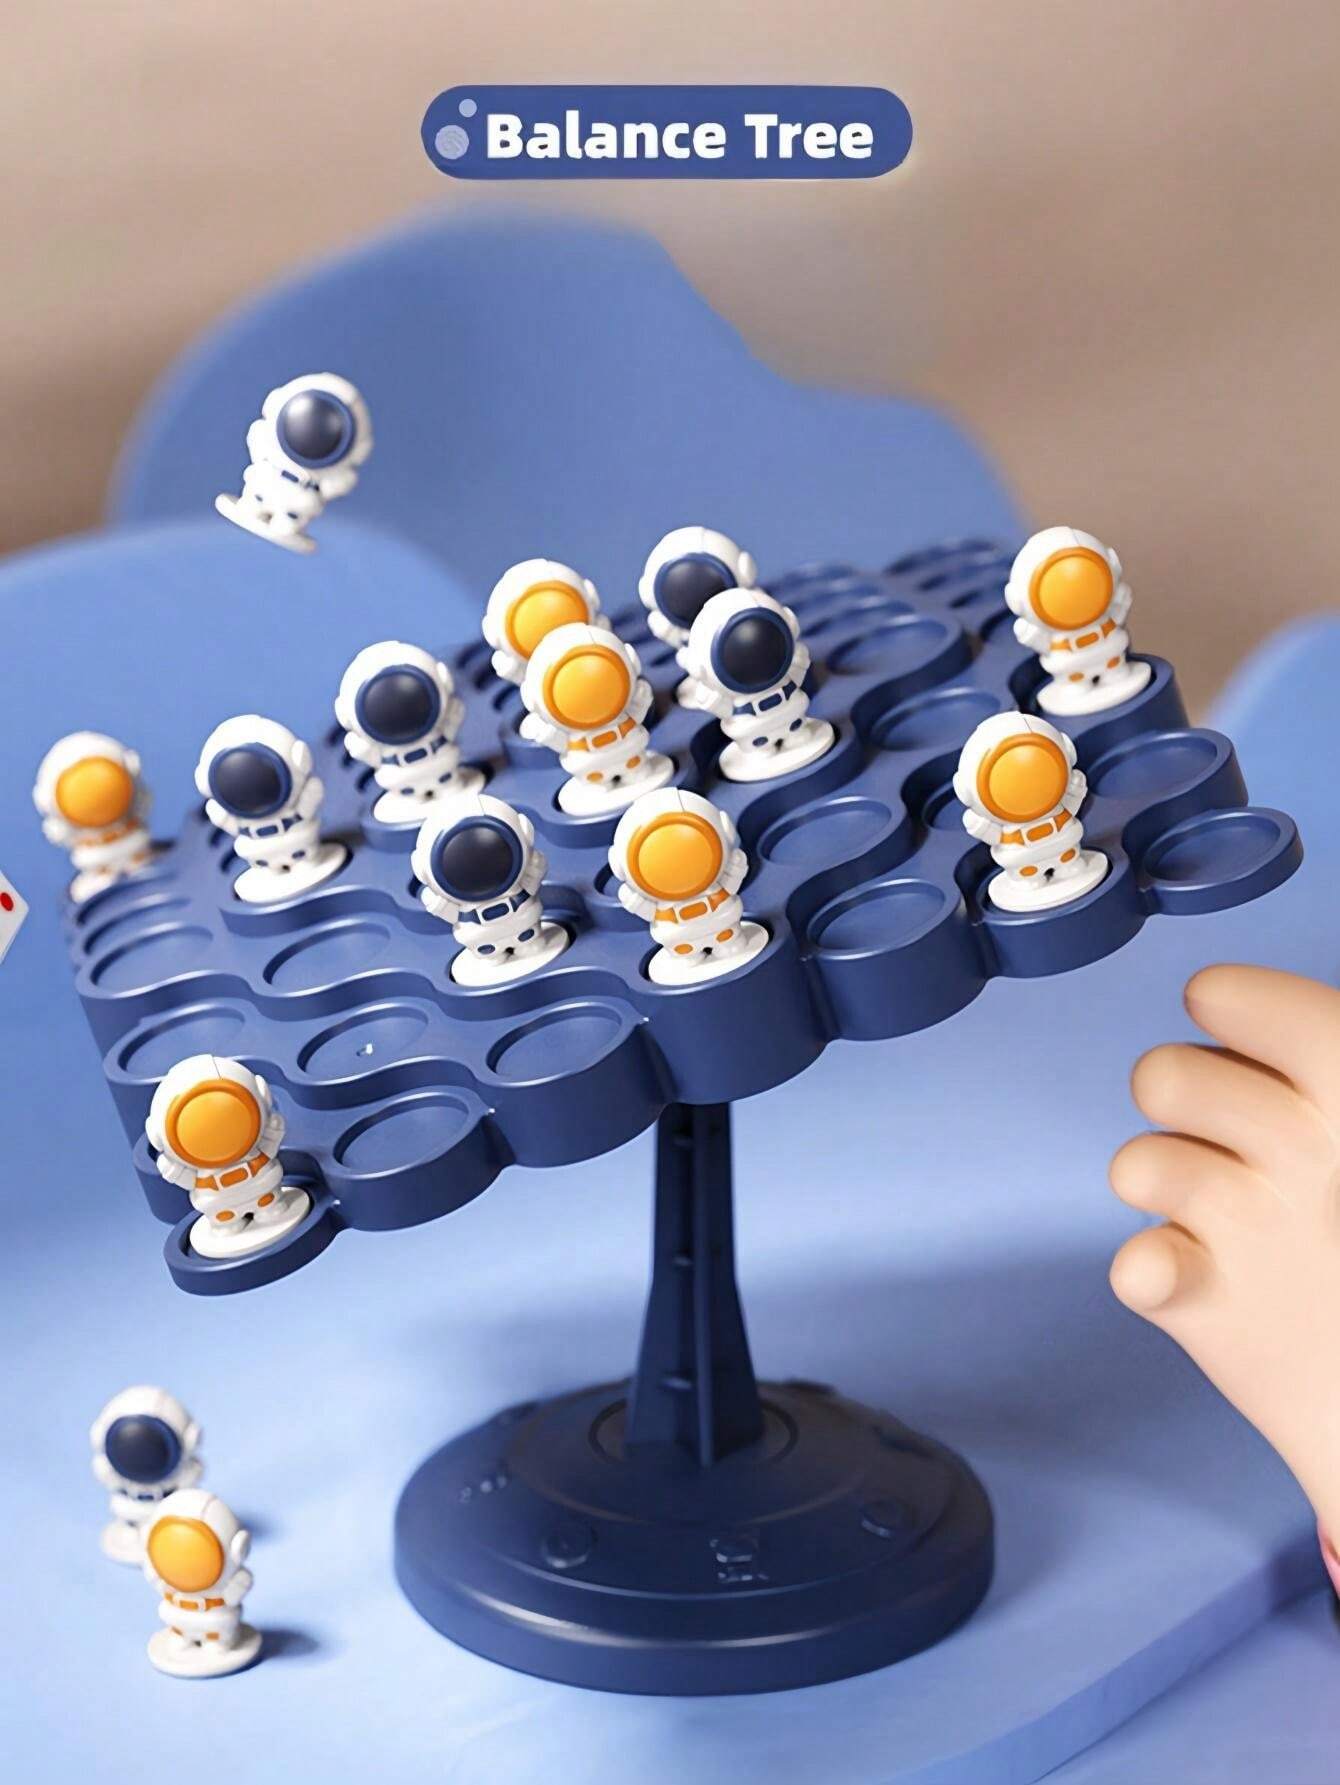 1pc Astronaut Balance Table Game, Puzzle Fun Stacking Game Interactive Toy For Adult Drinking Battle